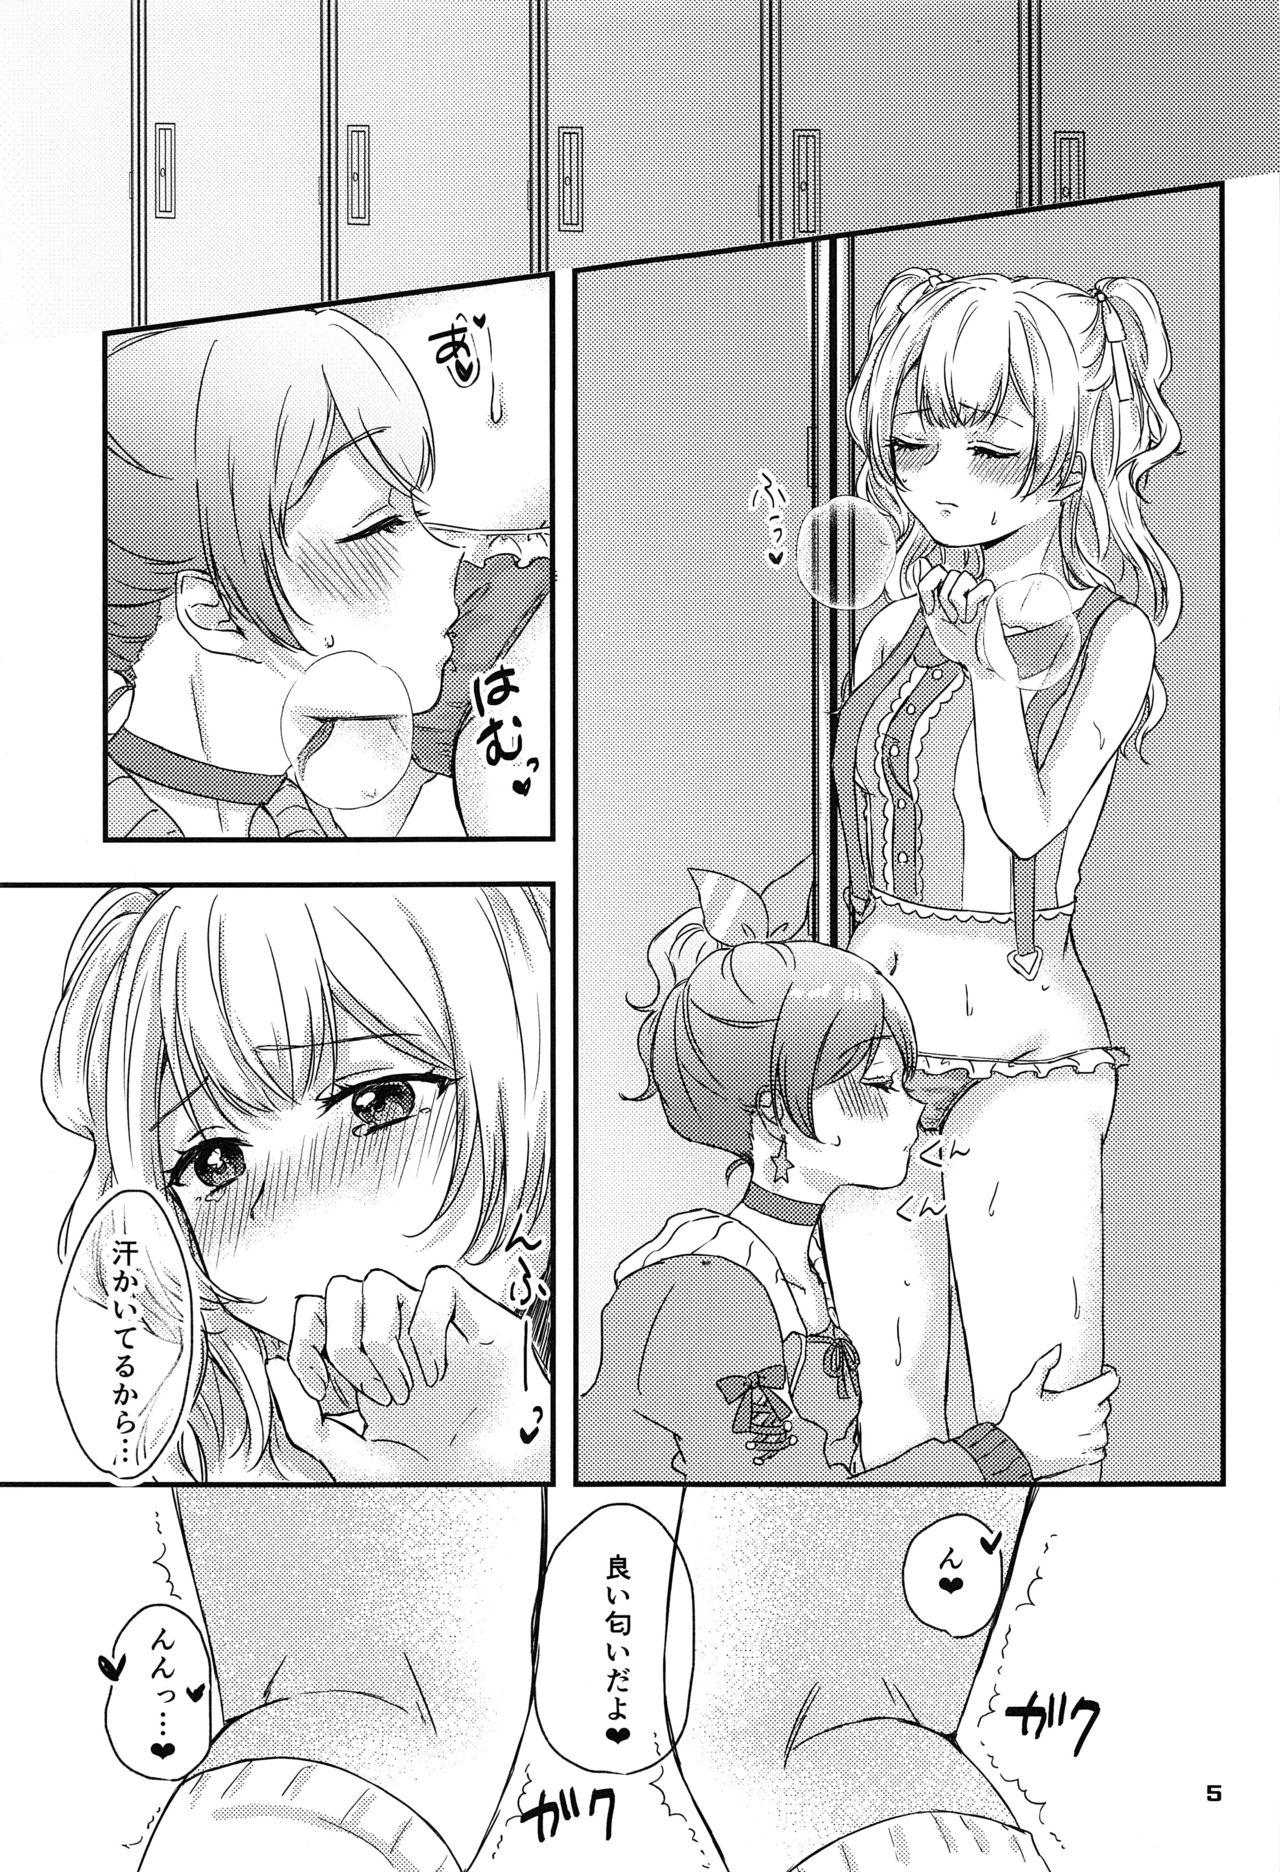 Rimming Sweet Costume Sex time. - Bang dream Friend - Page 3